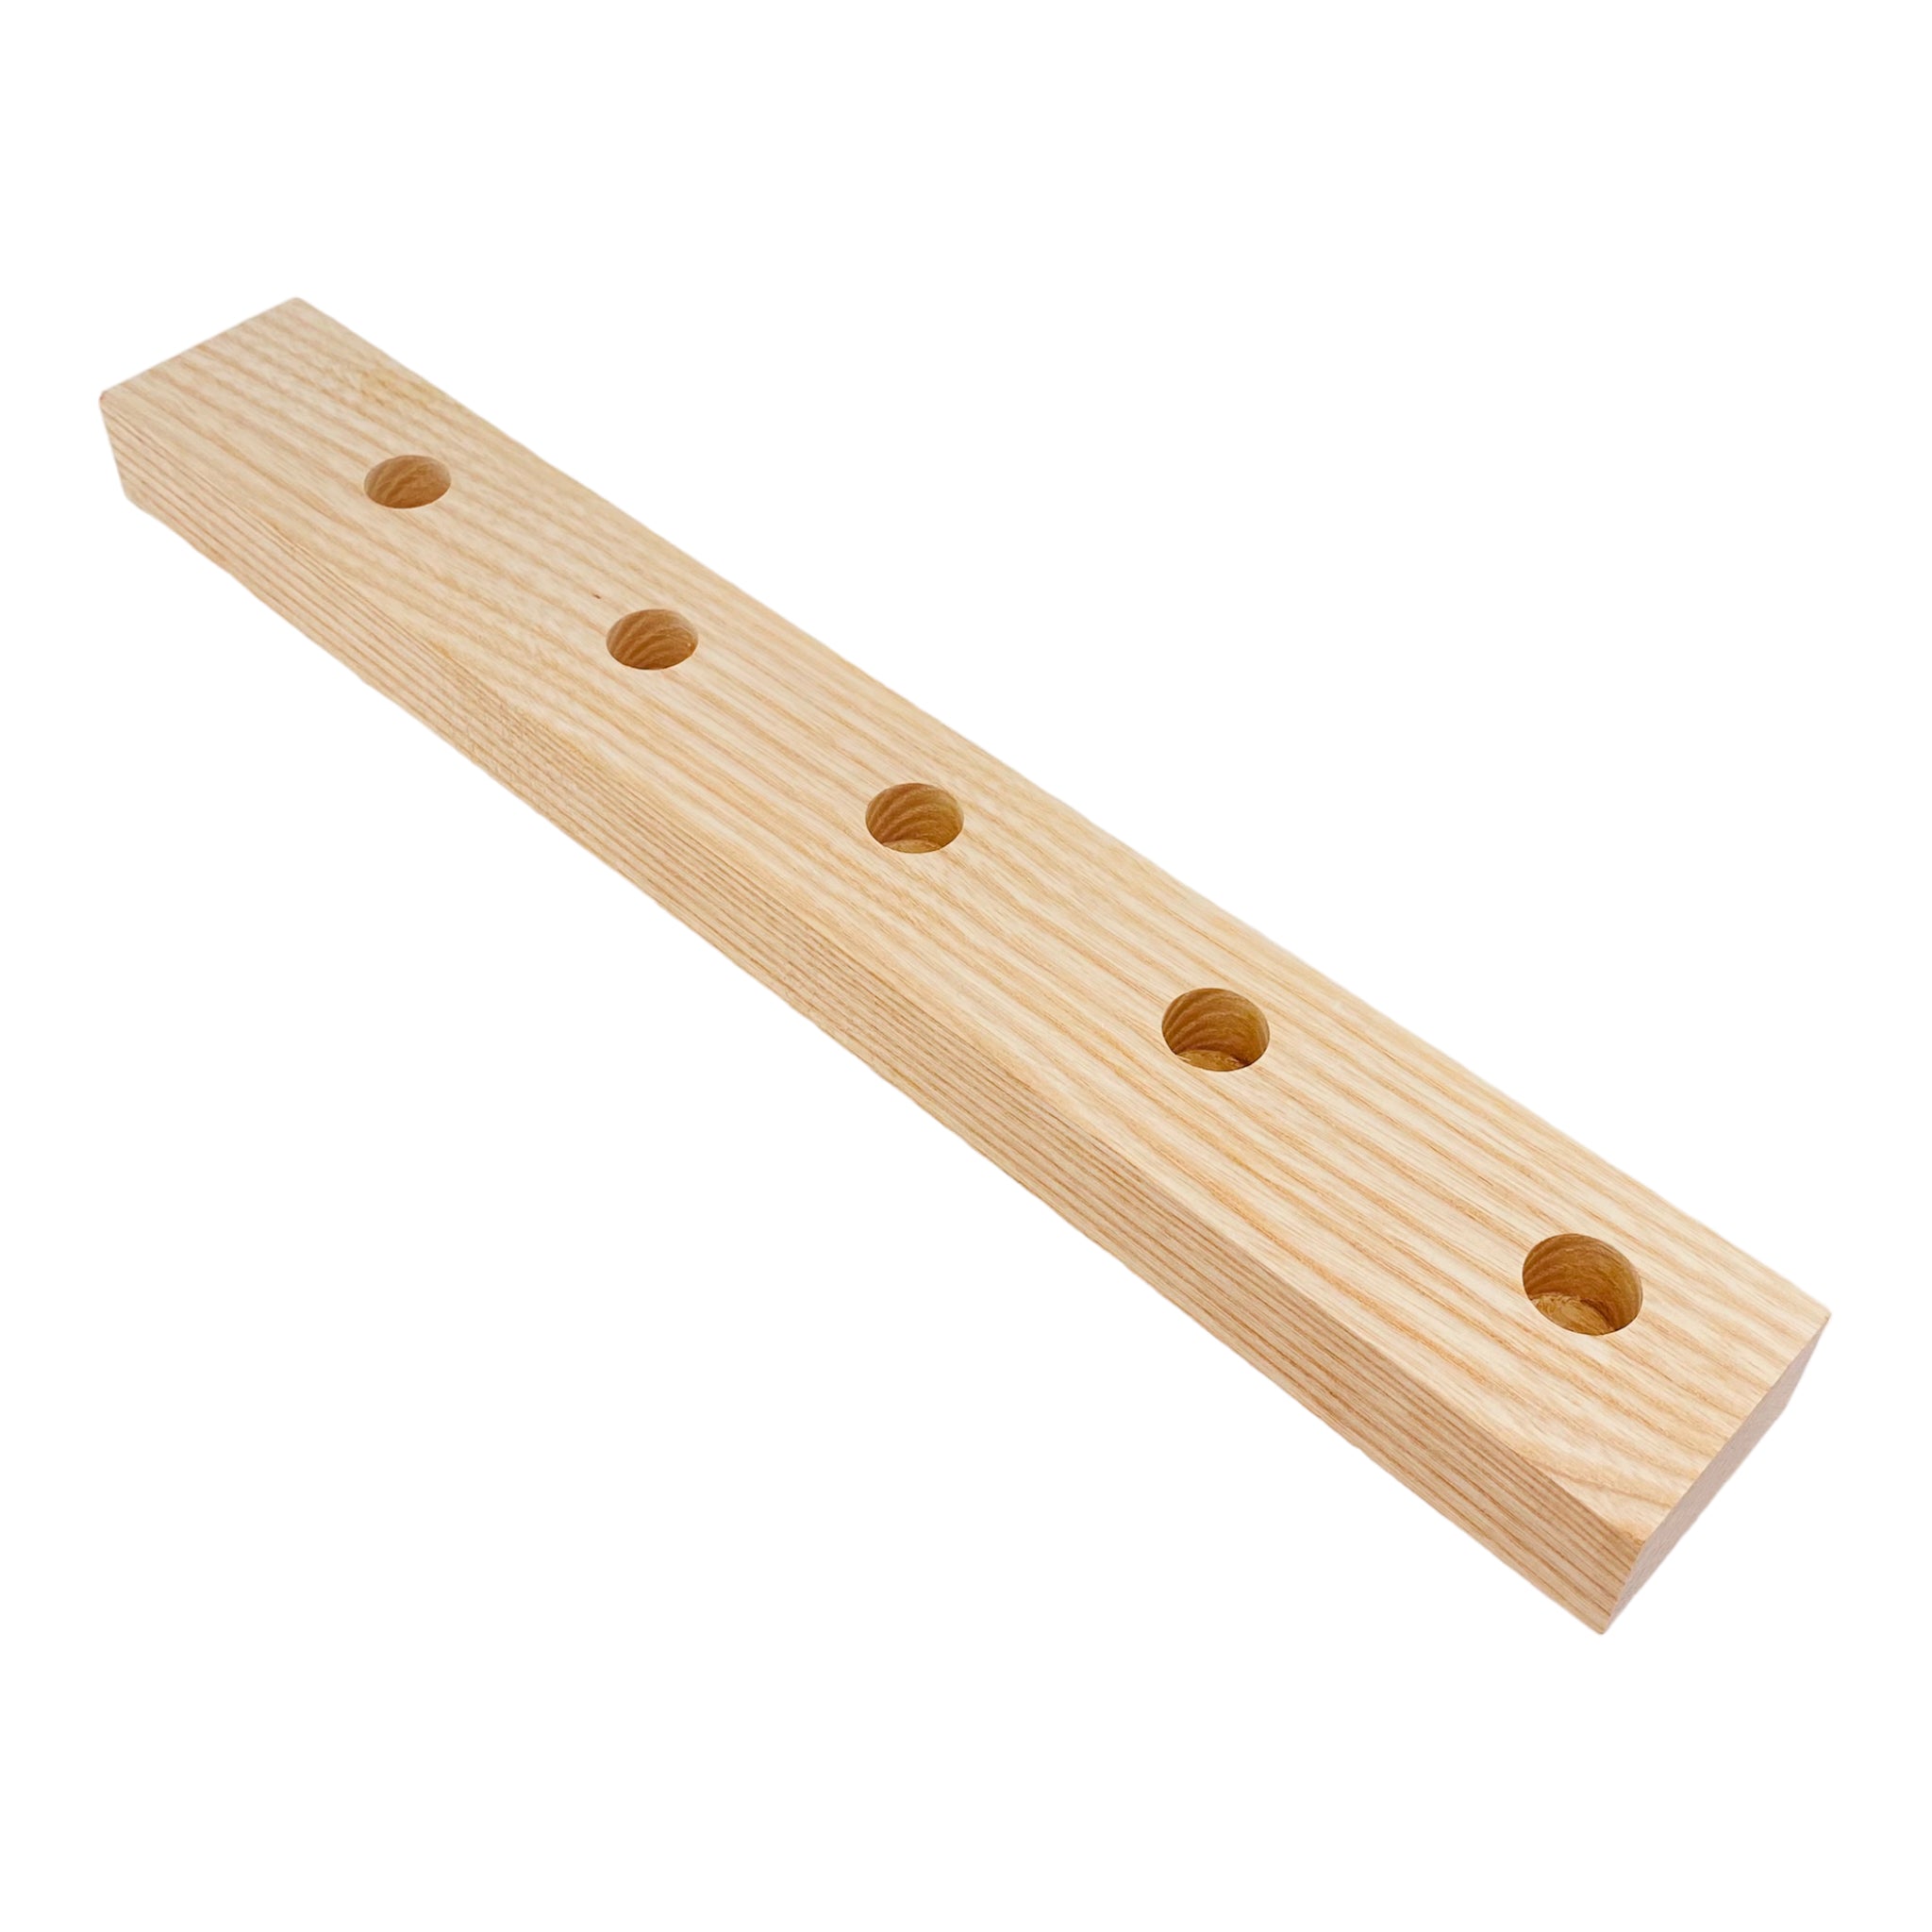 5 Hole Wood Display Stand Holder For 14mm Bong Bowl Pieces Or Quartz Bangers - Cedar